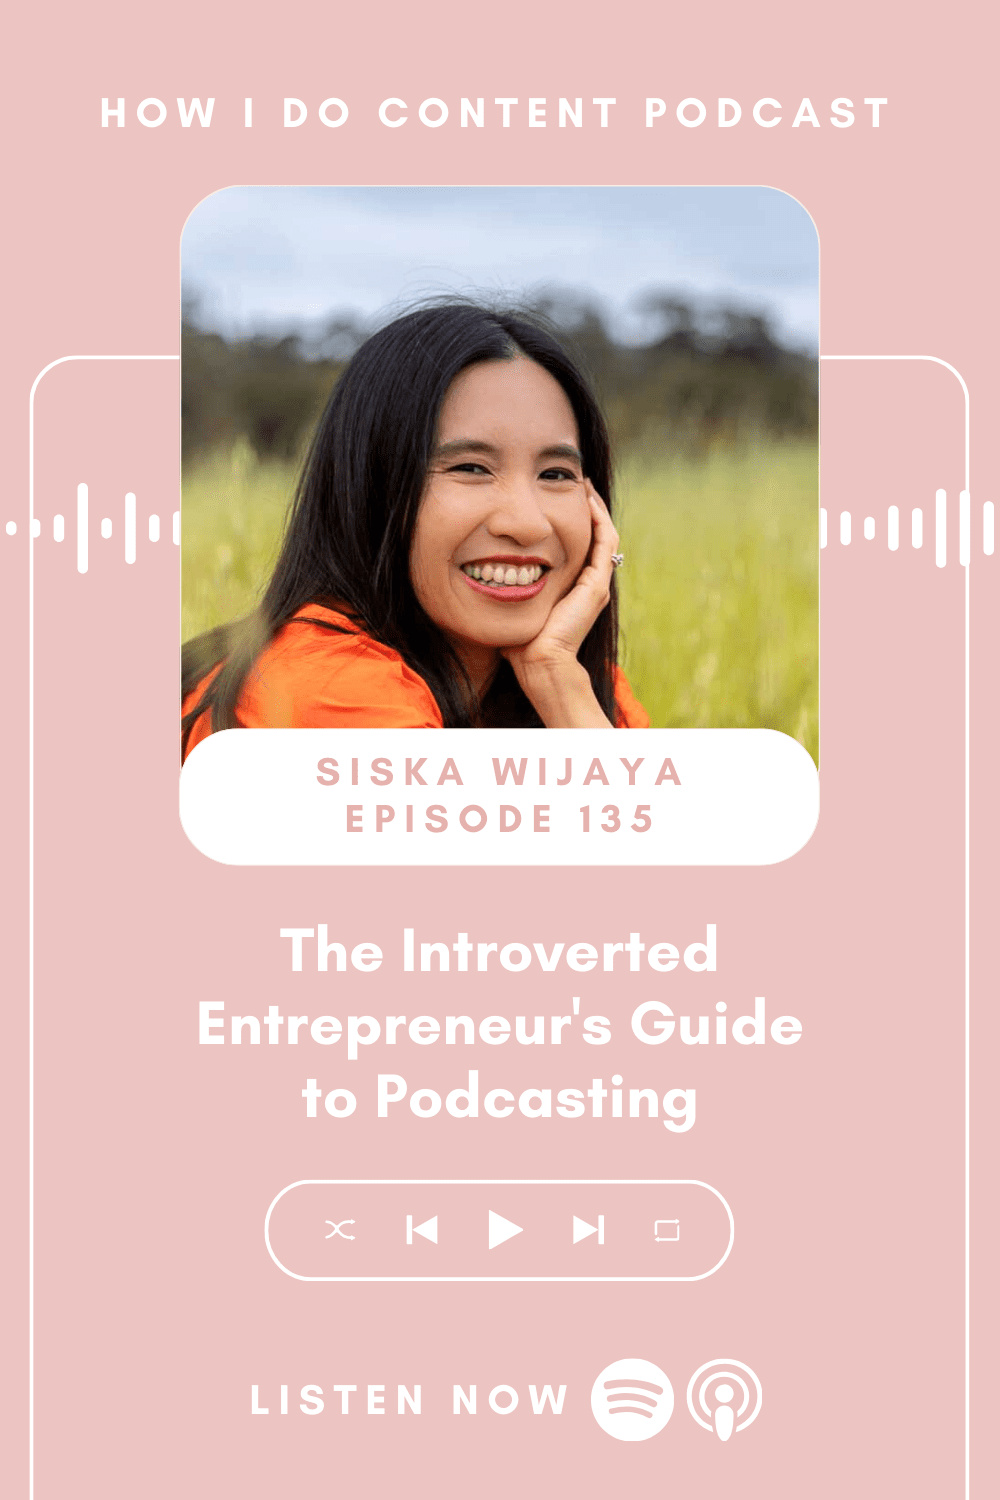 The Introverted Entrepreneur's Guide to Podcasting with Siska Wijaya